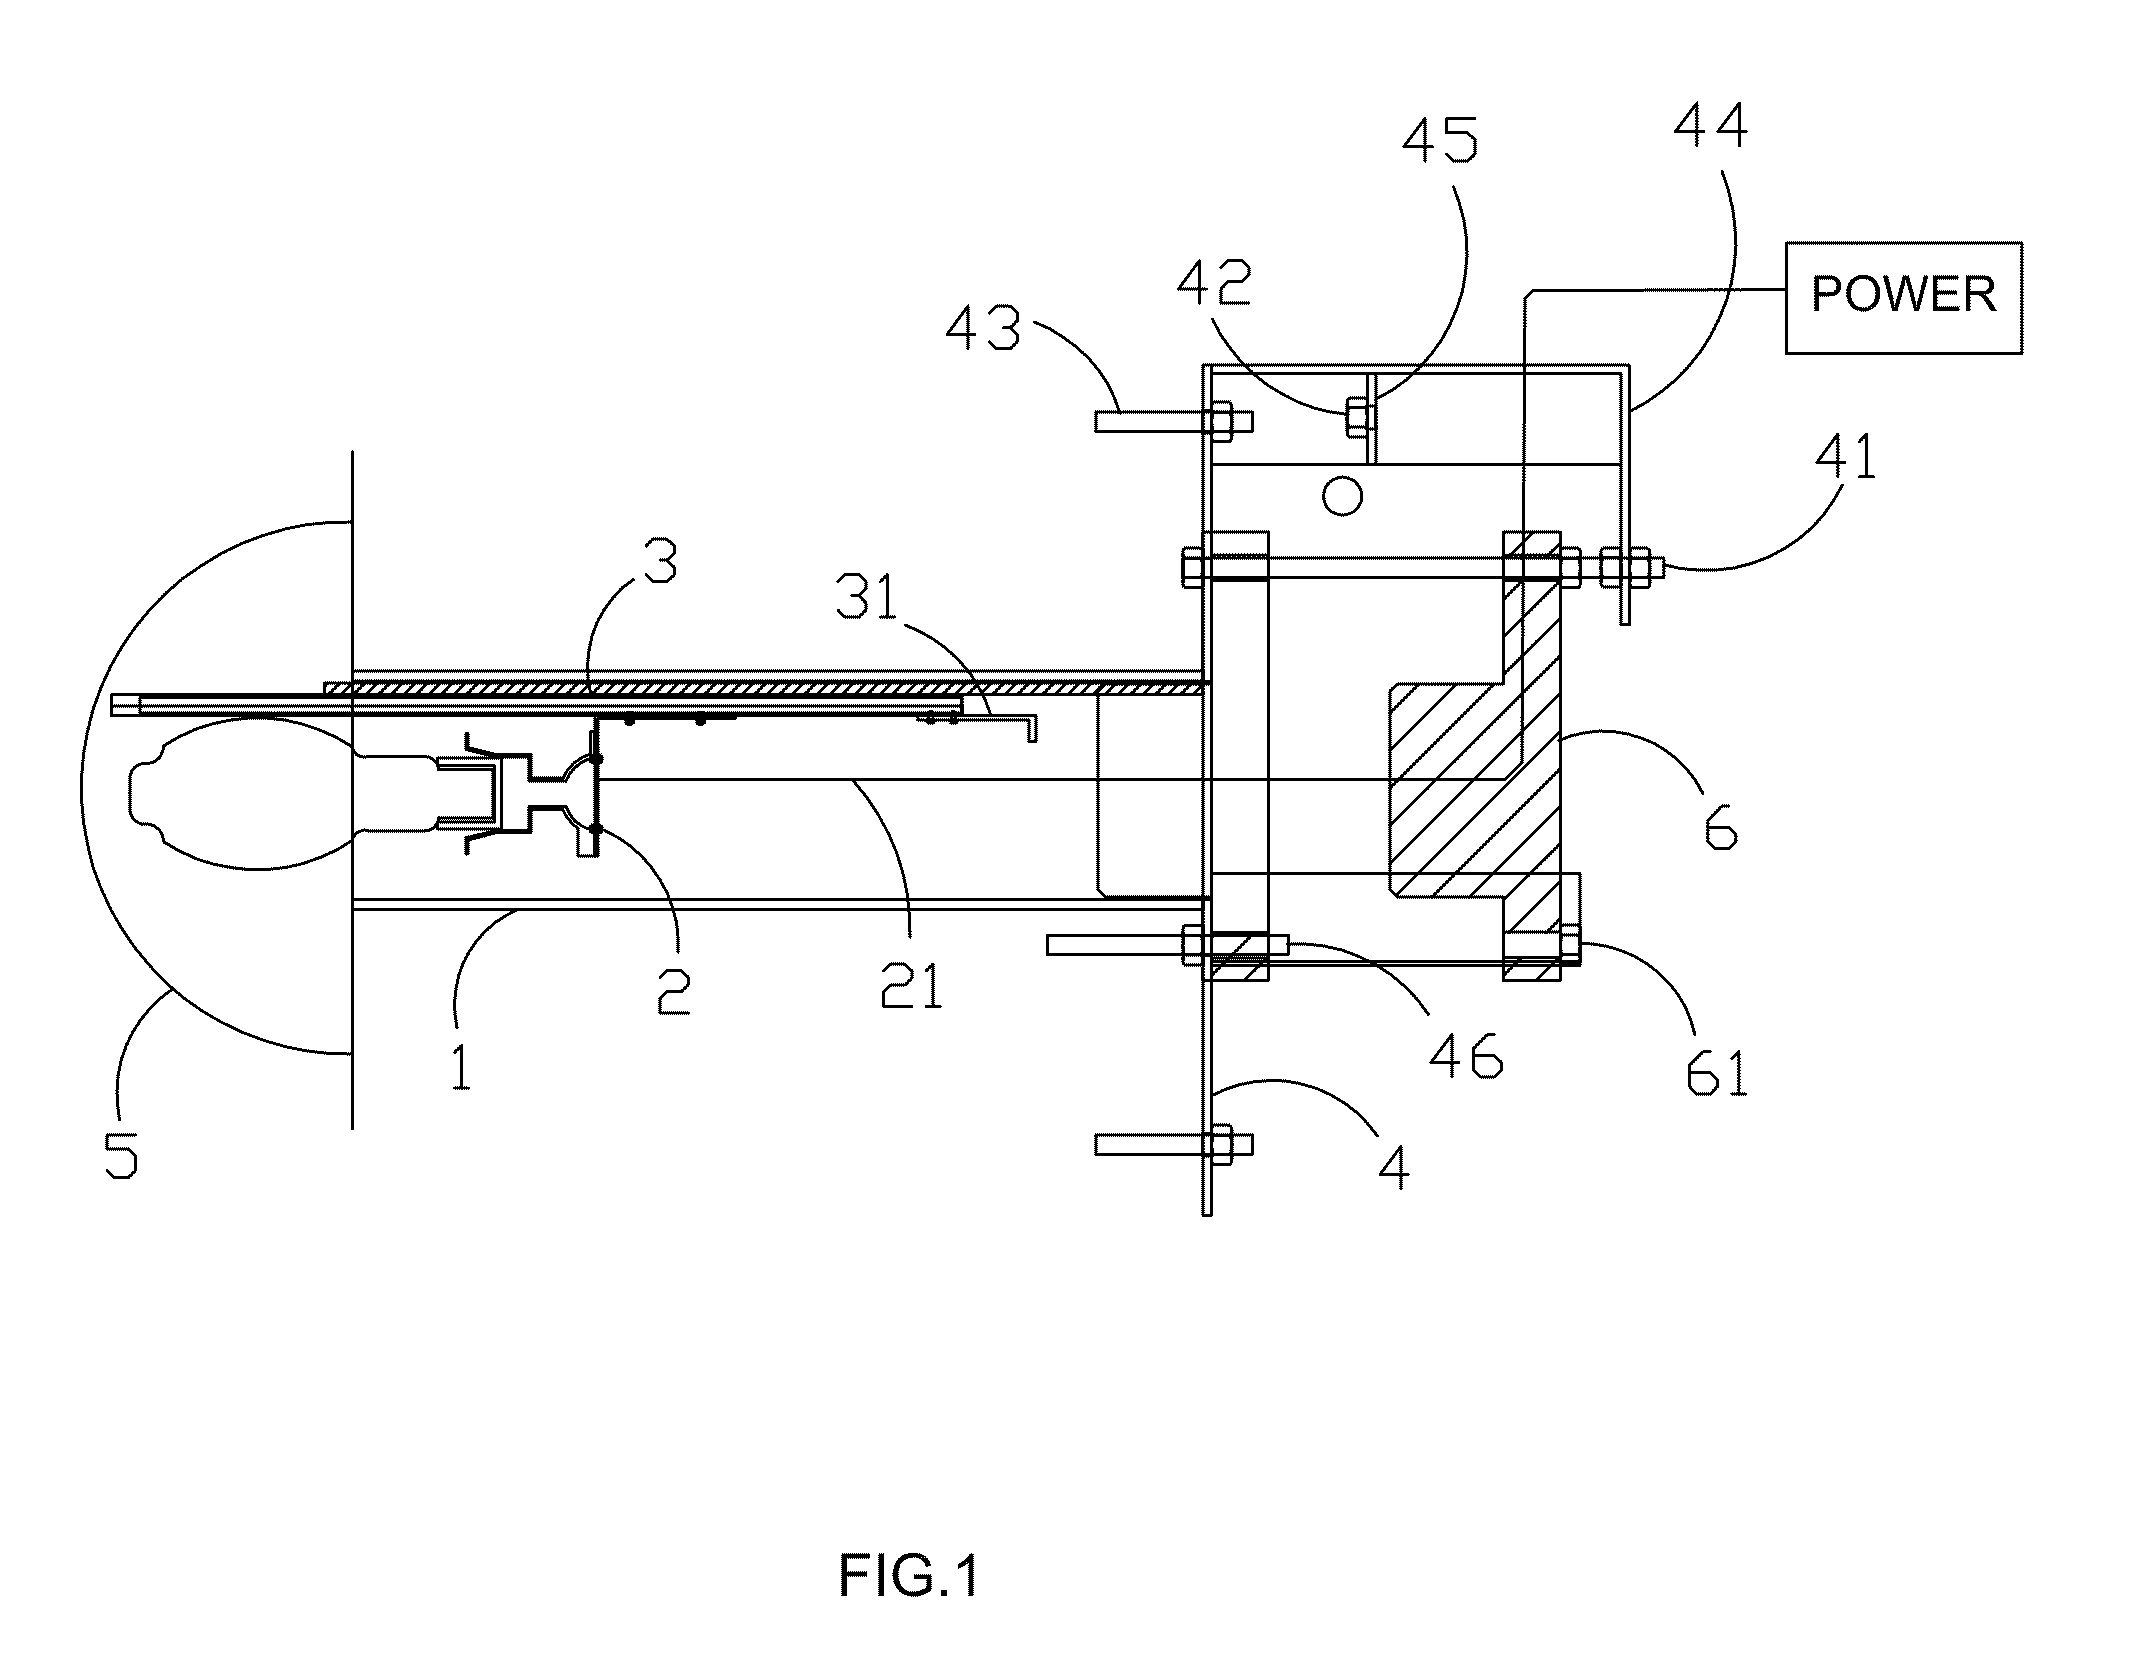 Maintenance mechanism for lighting equipment in a closed space of high radiation activity